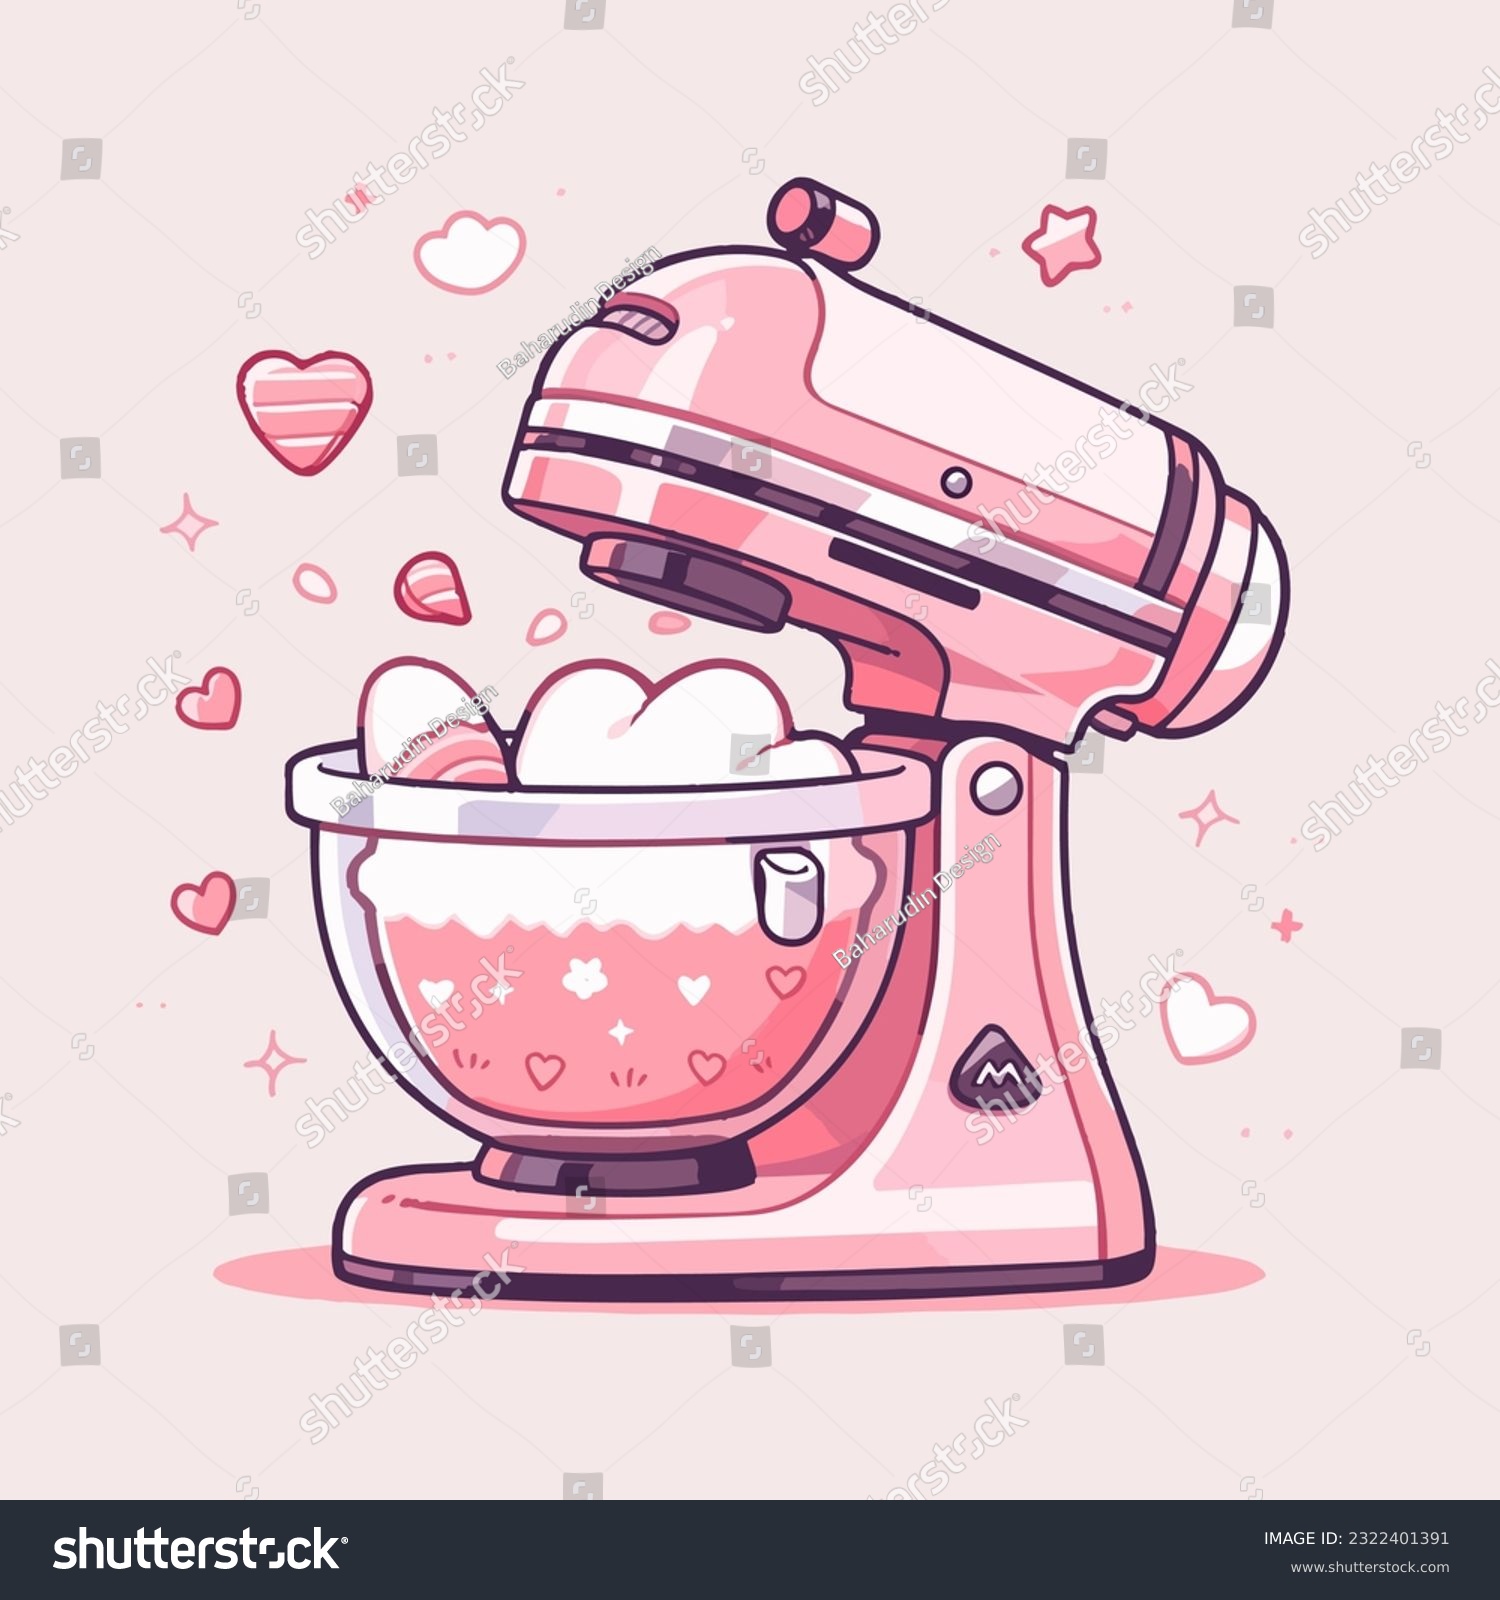 SVG of A charming animated mixer holding a bowl of cake batter svg